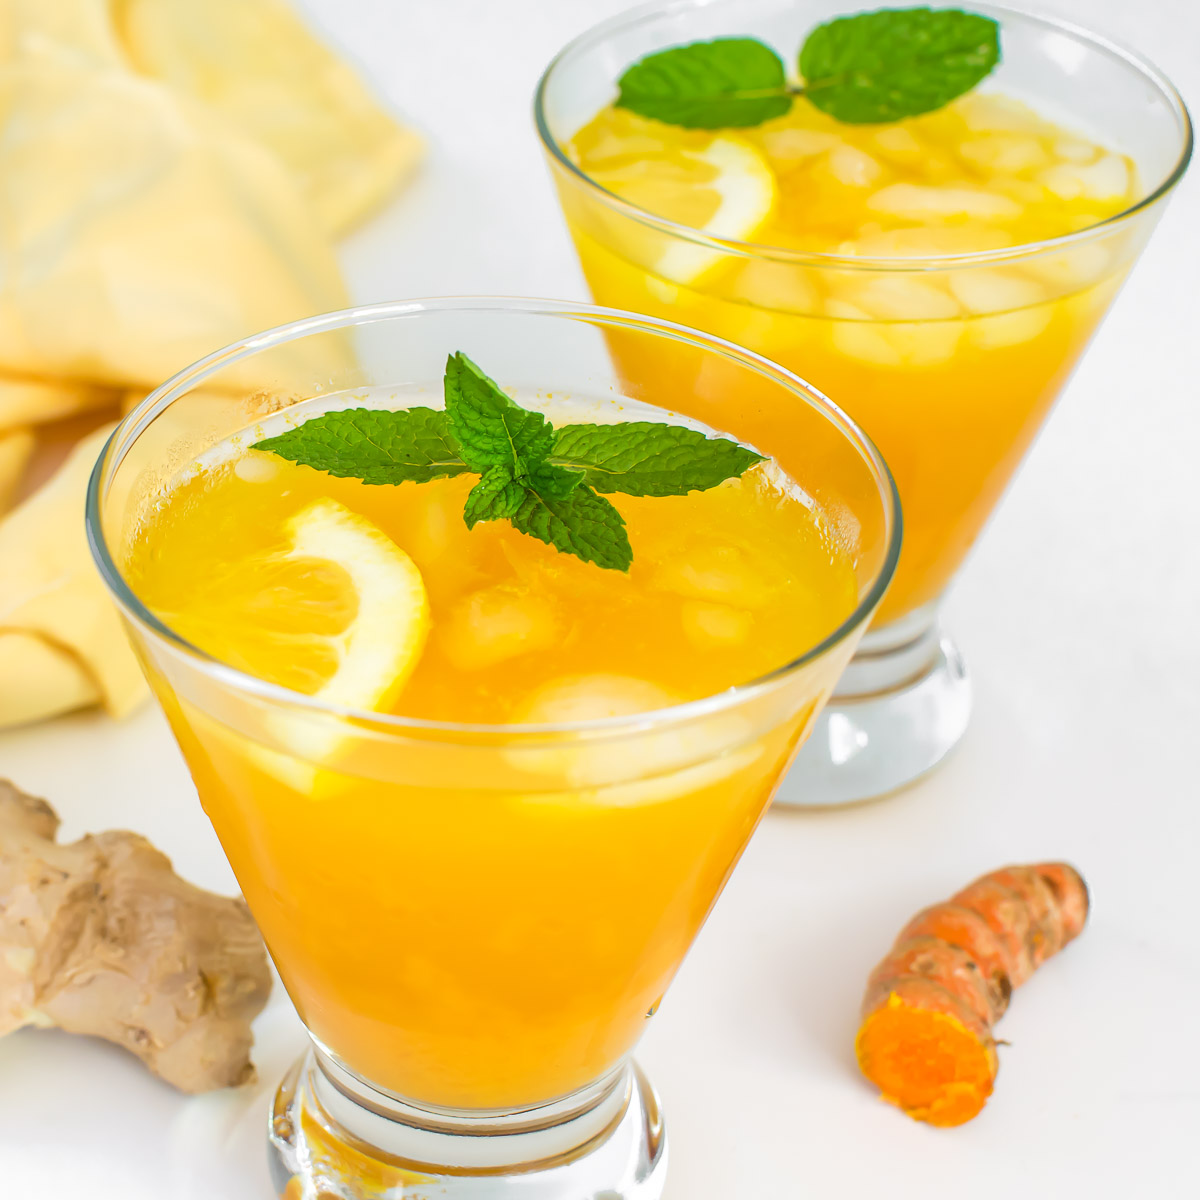 ☑️Recipe >> kiipfit.com/turmeric-ginge…
This antioxidant rich Turmeric Ginger Lemonade🍹is made with fresh spices and has the right tang and zest, thereby helps to fight fatigue and reduce inflammation #lemoanade #summerecipe #RecipeOfTheDay #foodinspiration